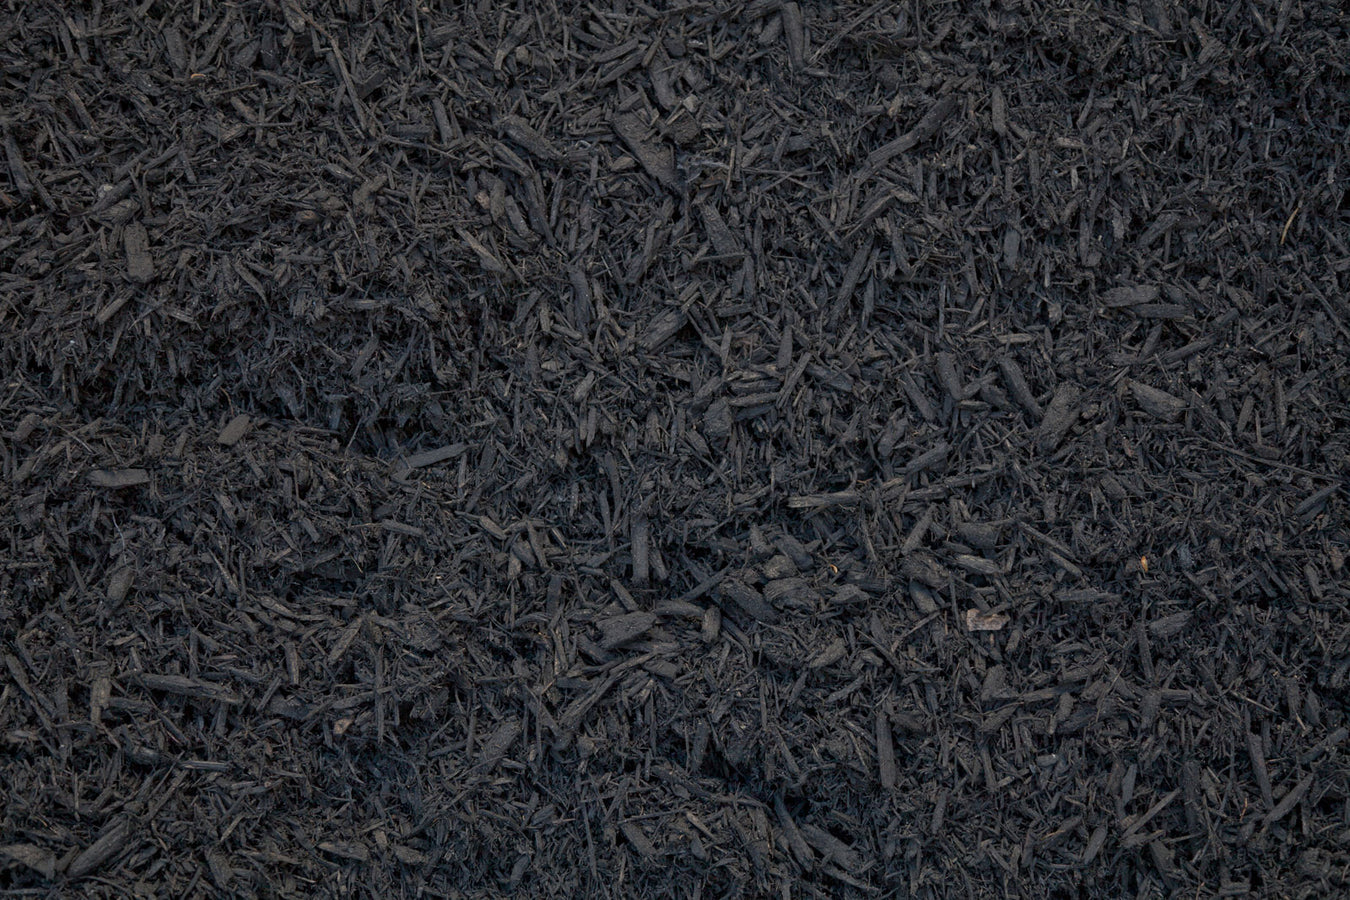 Bulk Mulch - available from Rice Road Greenhouses in Ontario, Canada